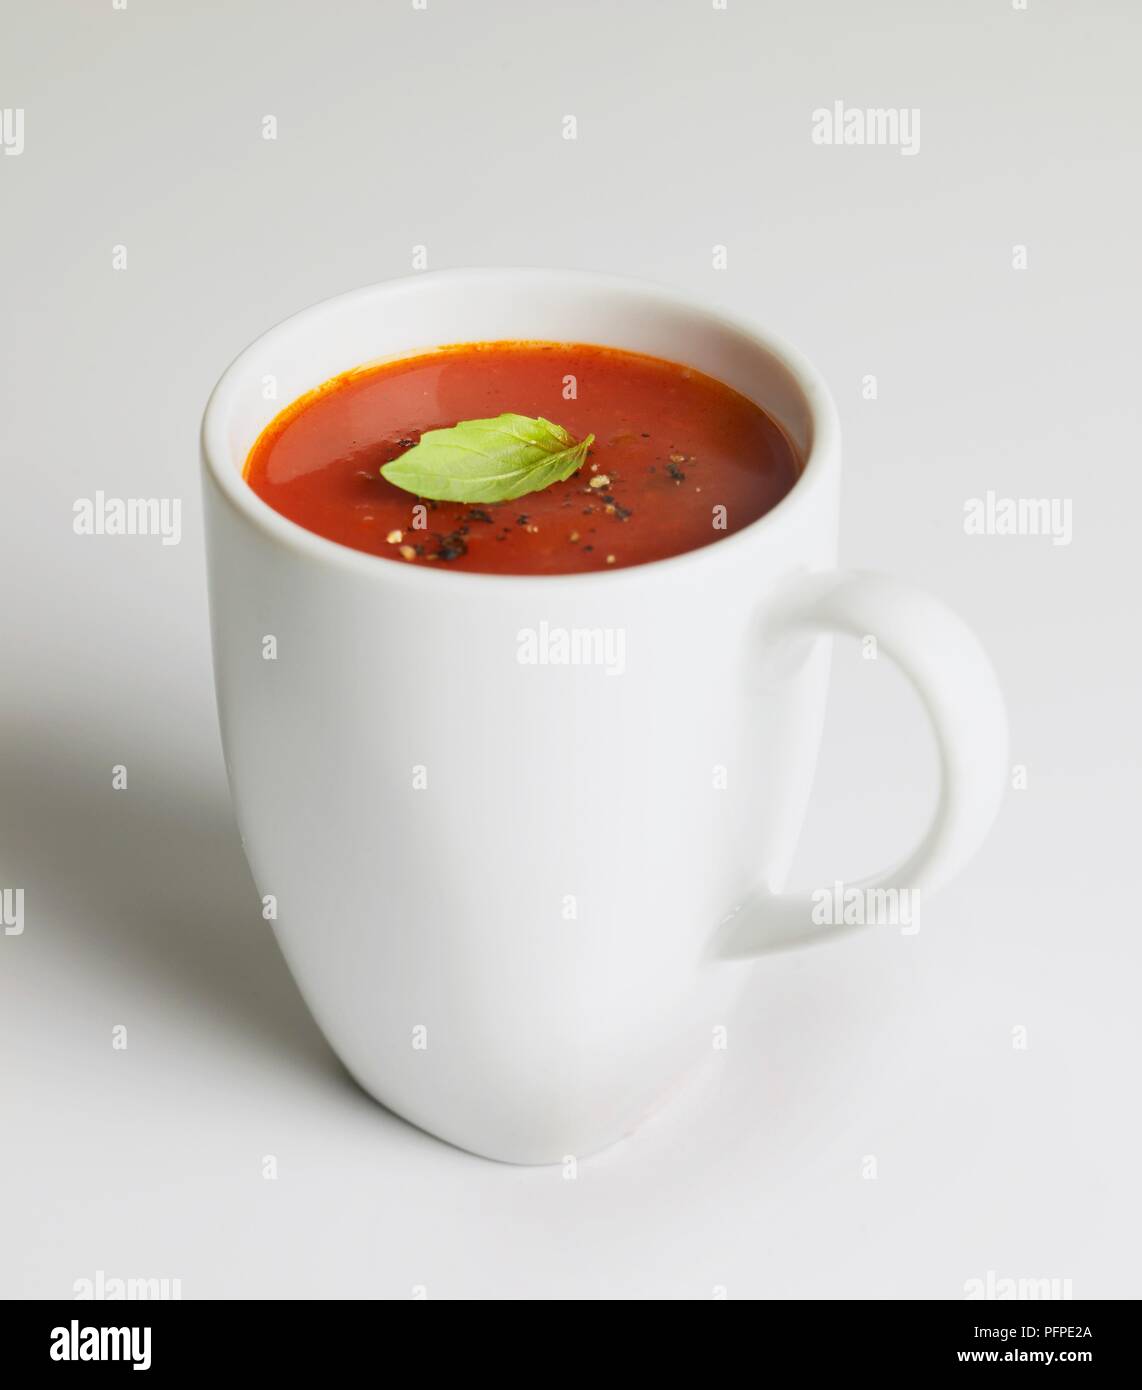 Tomato soup in mug, with crushed pepper and mint leaf Stock Photo